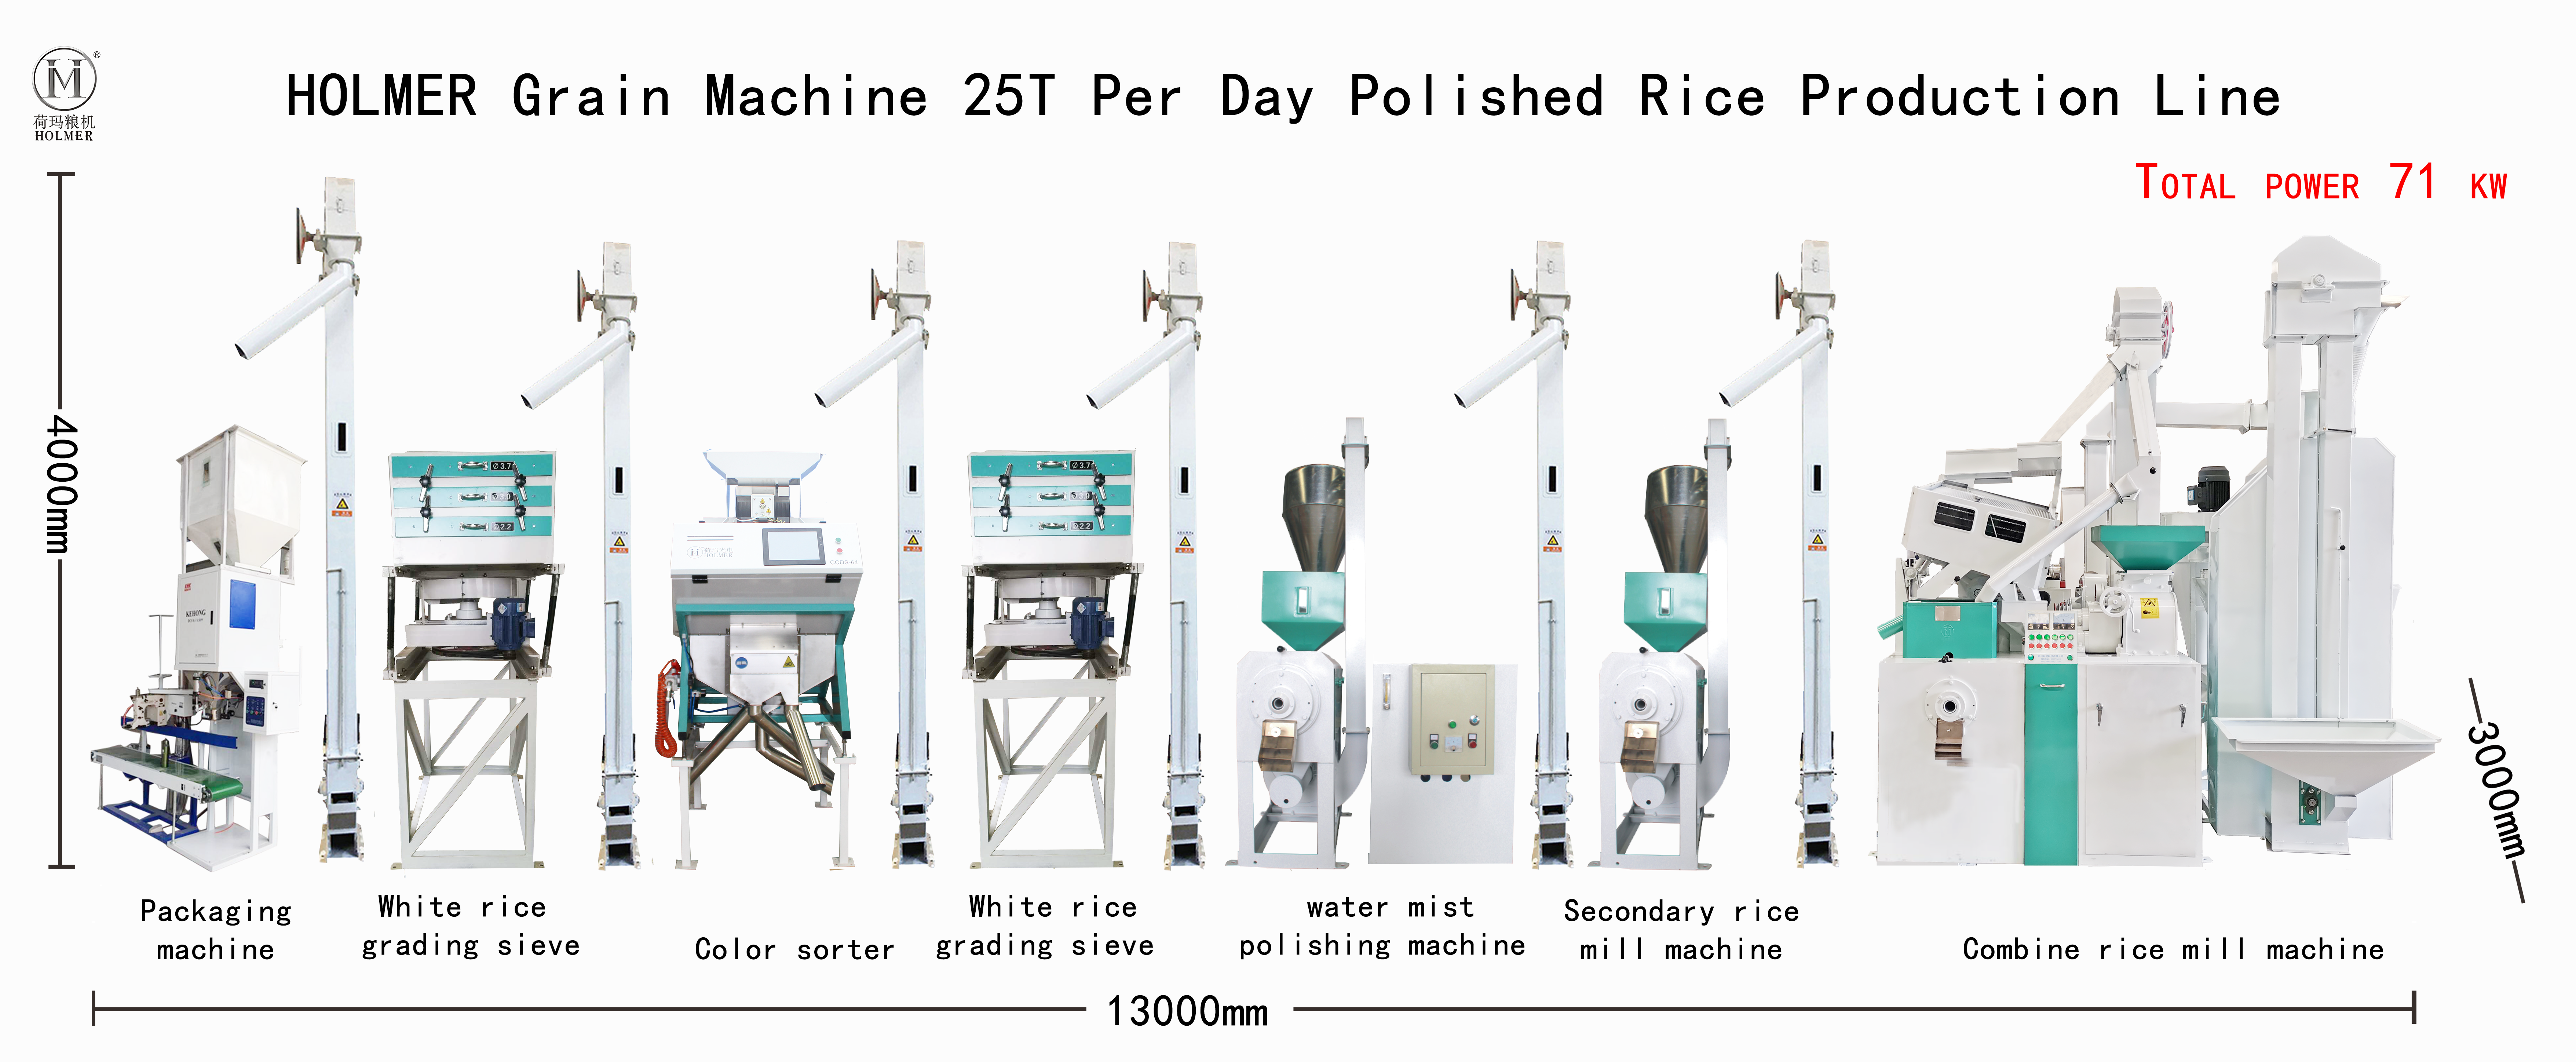 A report on the Holmer rice mill Machine